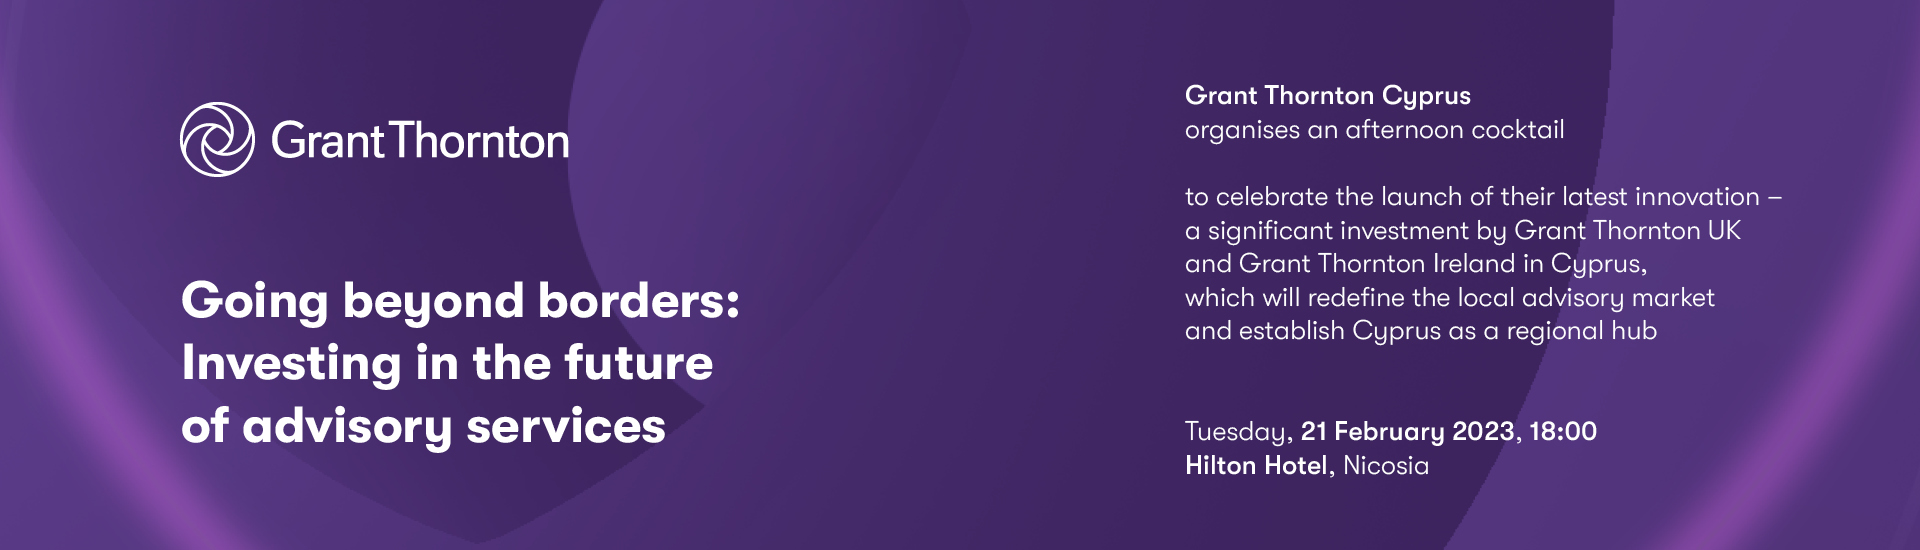 Grant Thornton Cyprus – Going beyond borders: Investing in the future of advisory services